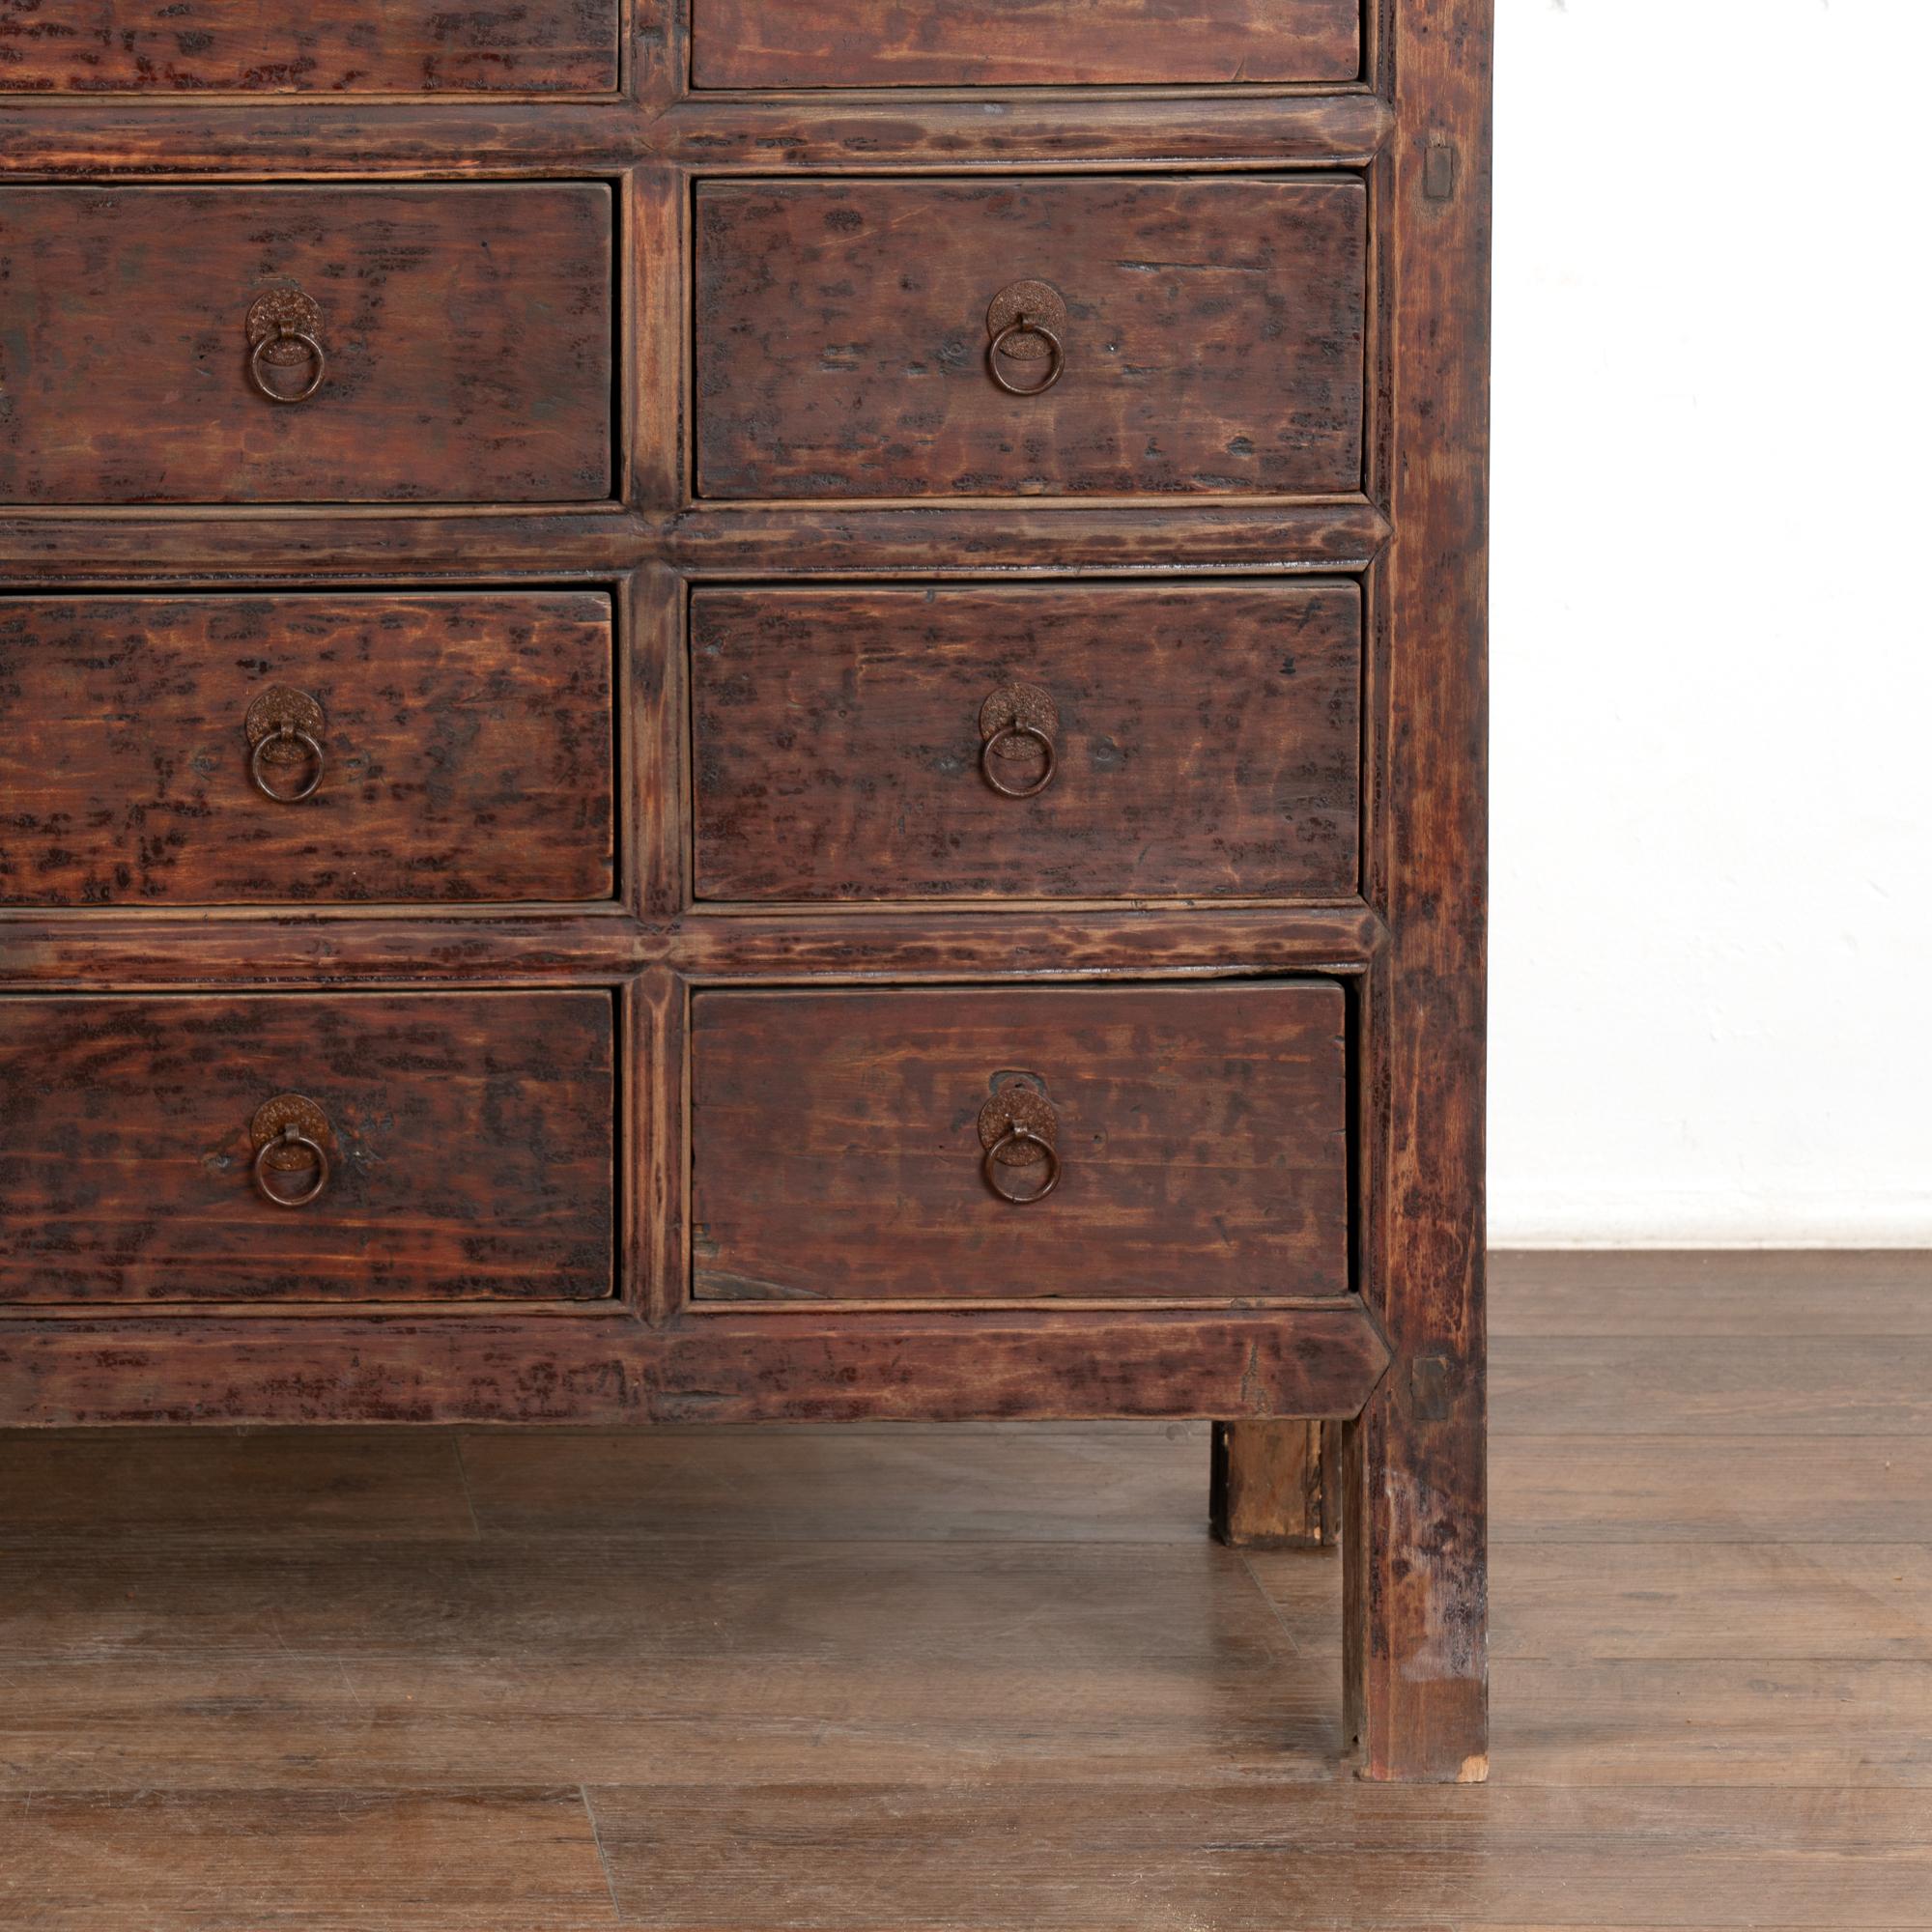 Chinese Apothecary Chest of 24 Drawers, circa 1820-40 For Sale 3